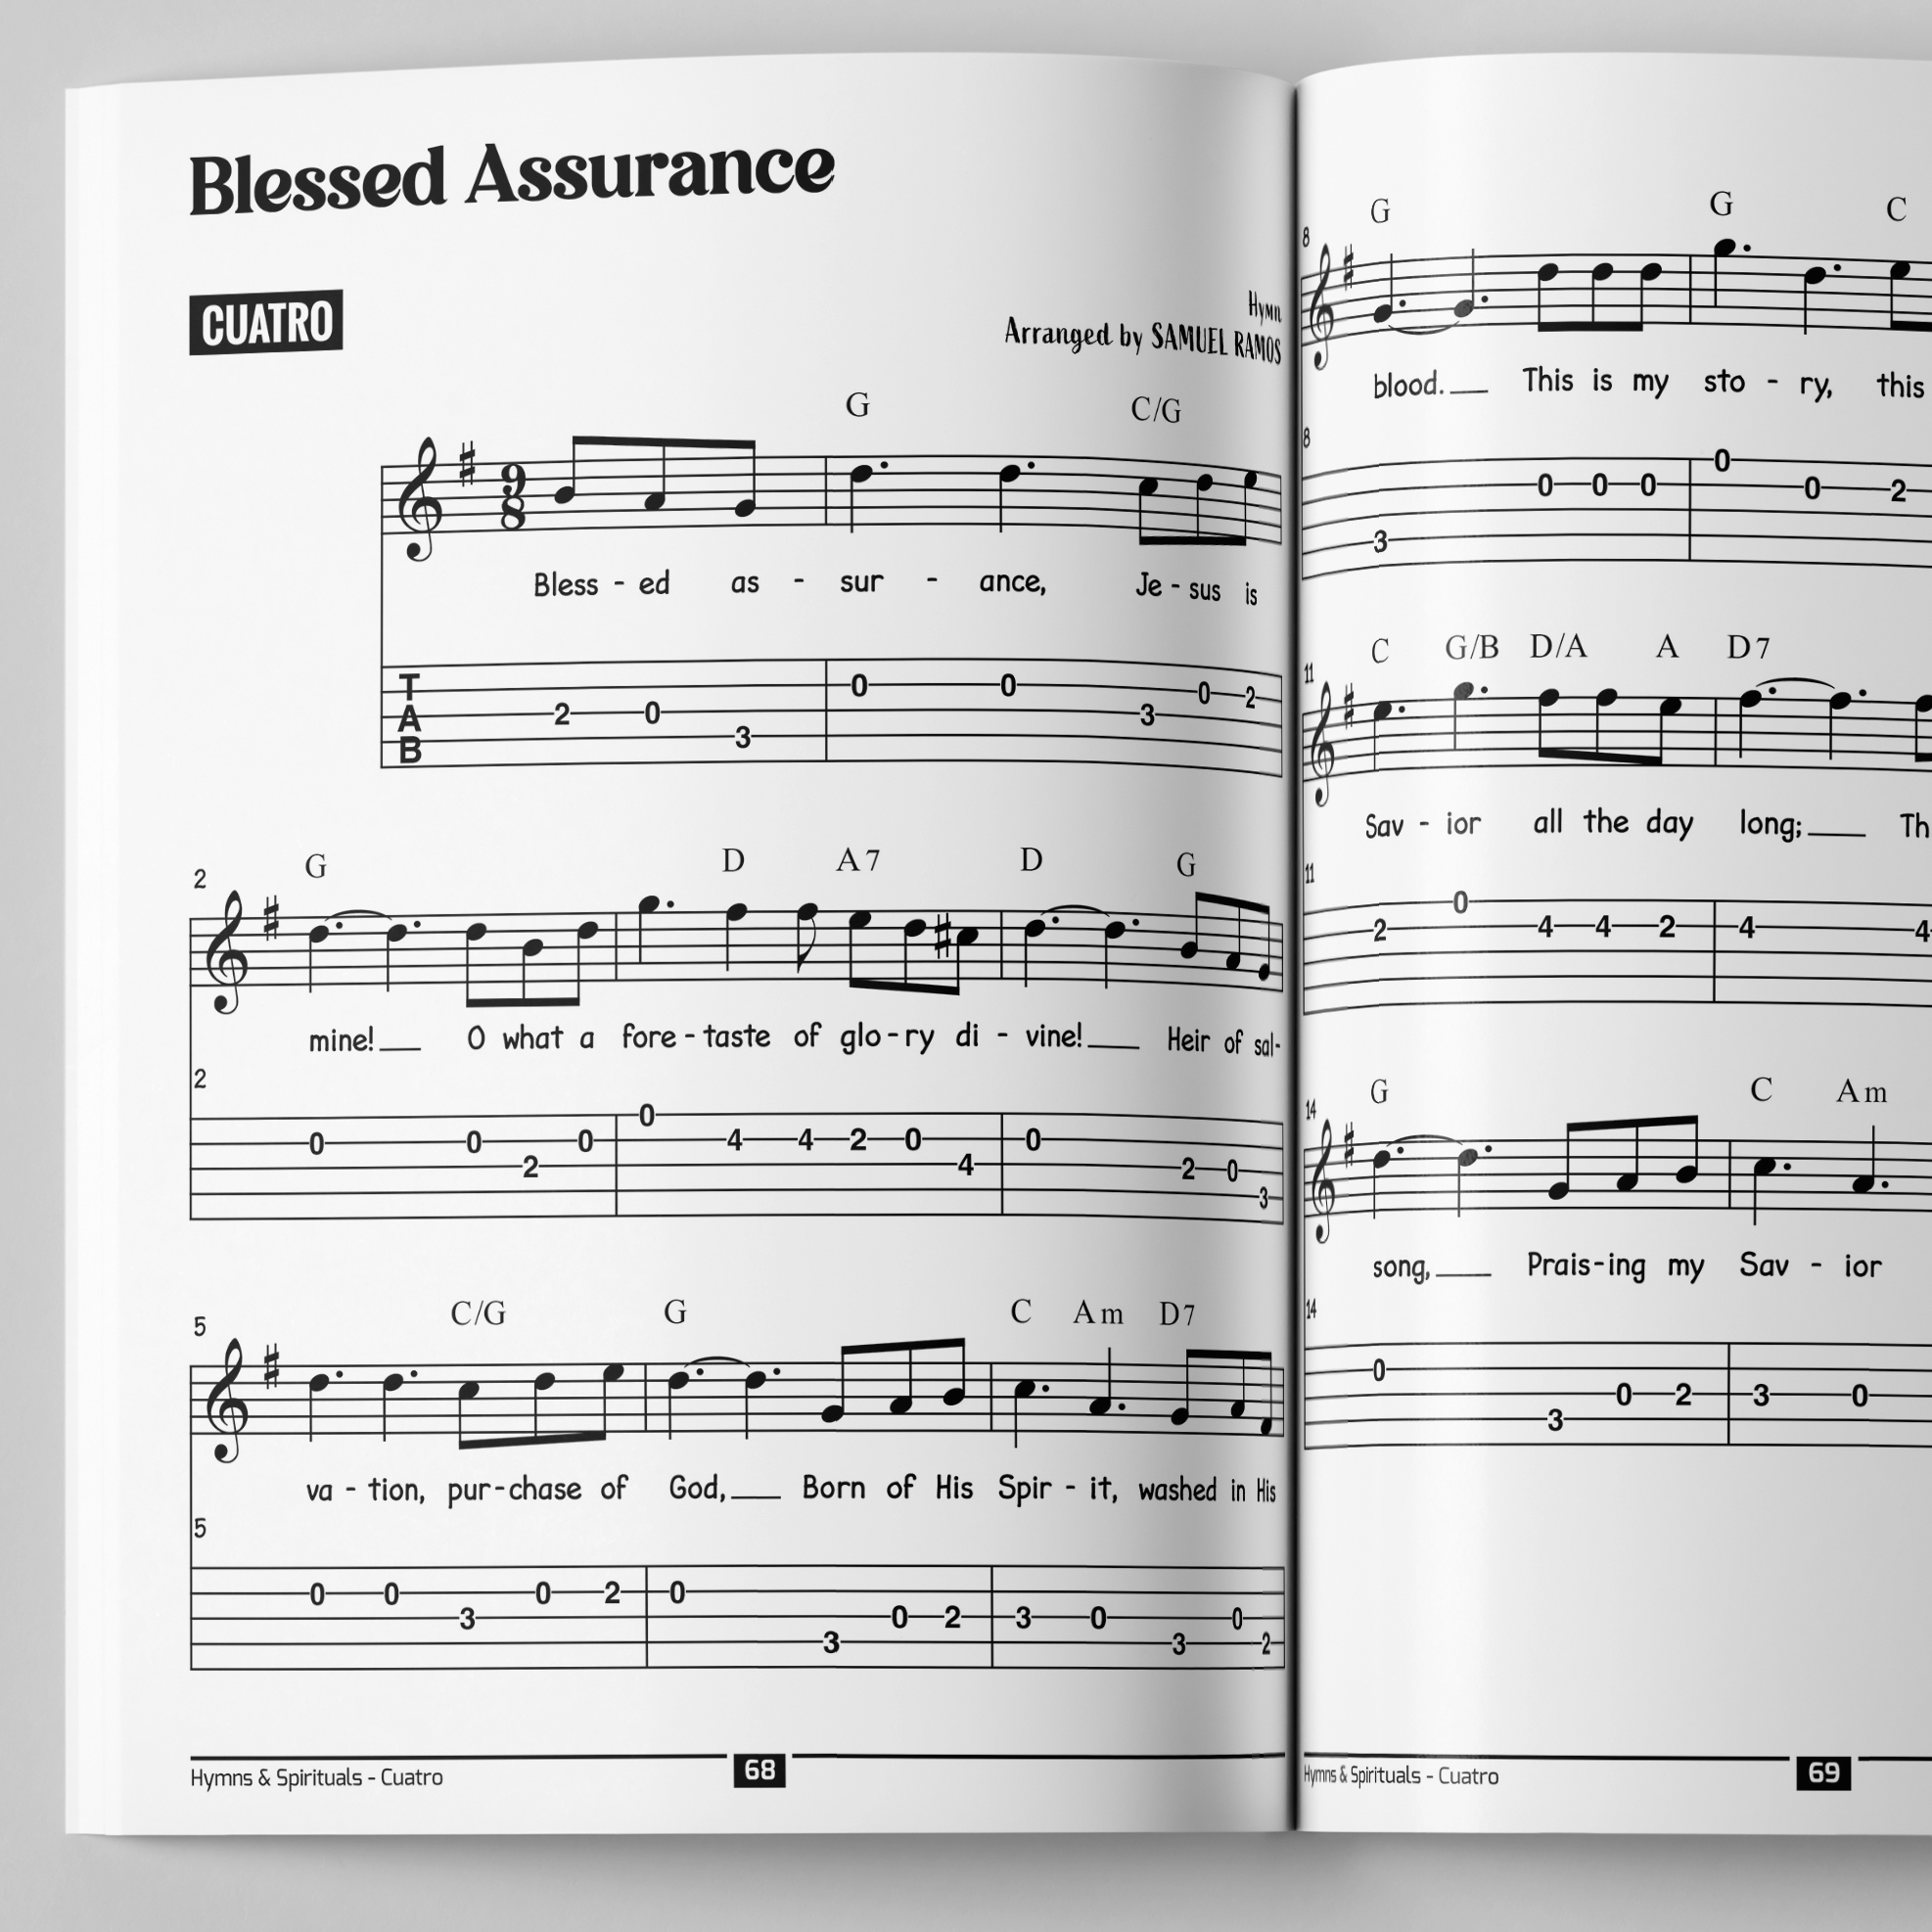 Hymns and Spirituals for Cuatro - Blessed Assurance